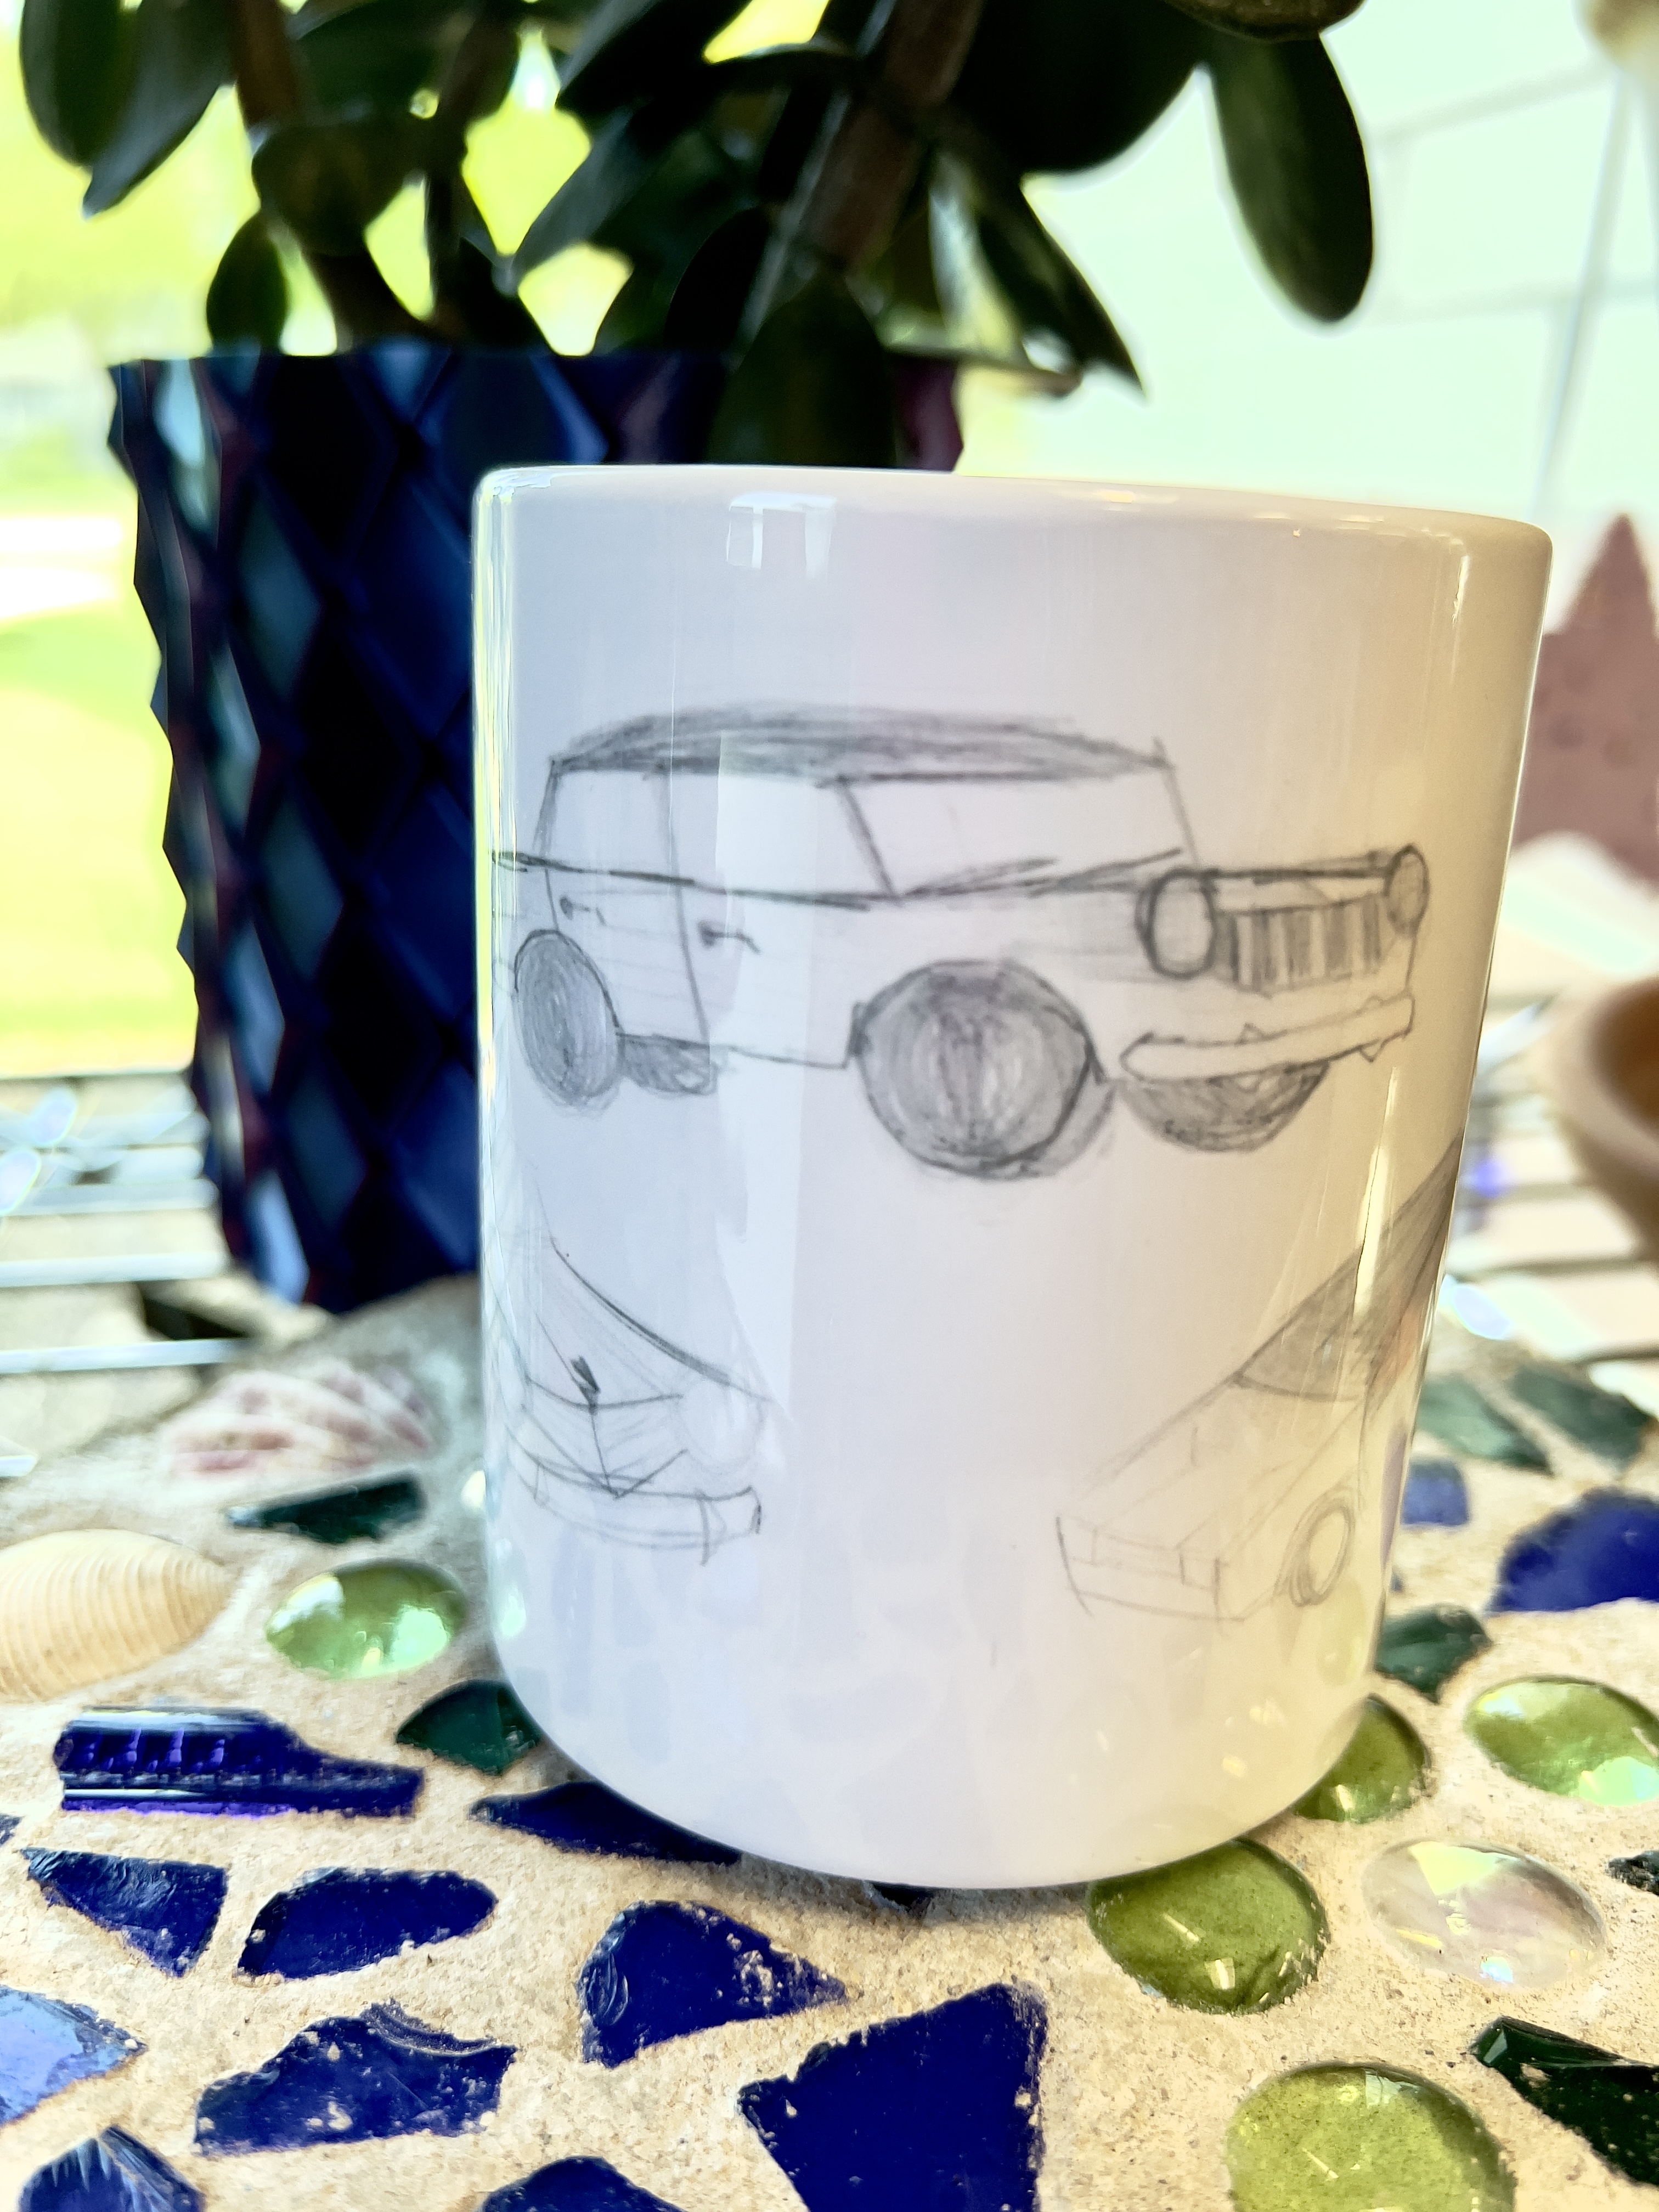 white coffee mug with cars drawn in pencil, mug is sitting on a garden stone with blue and green glass, with a plant behind mug